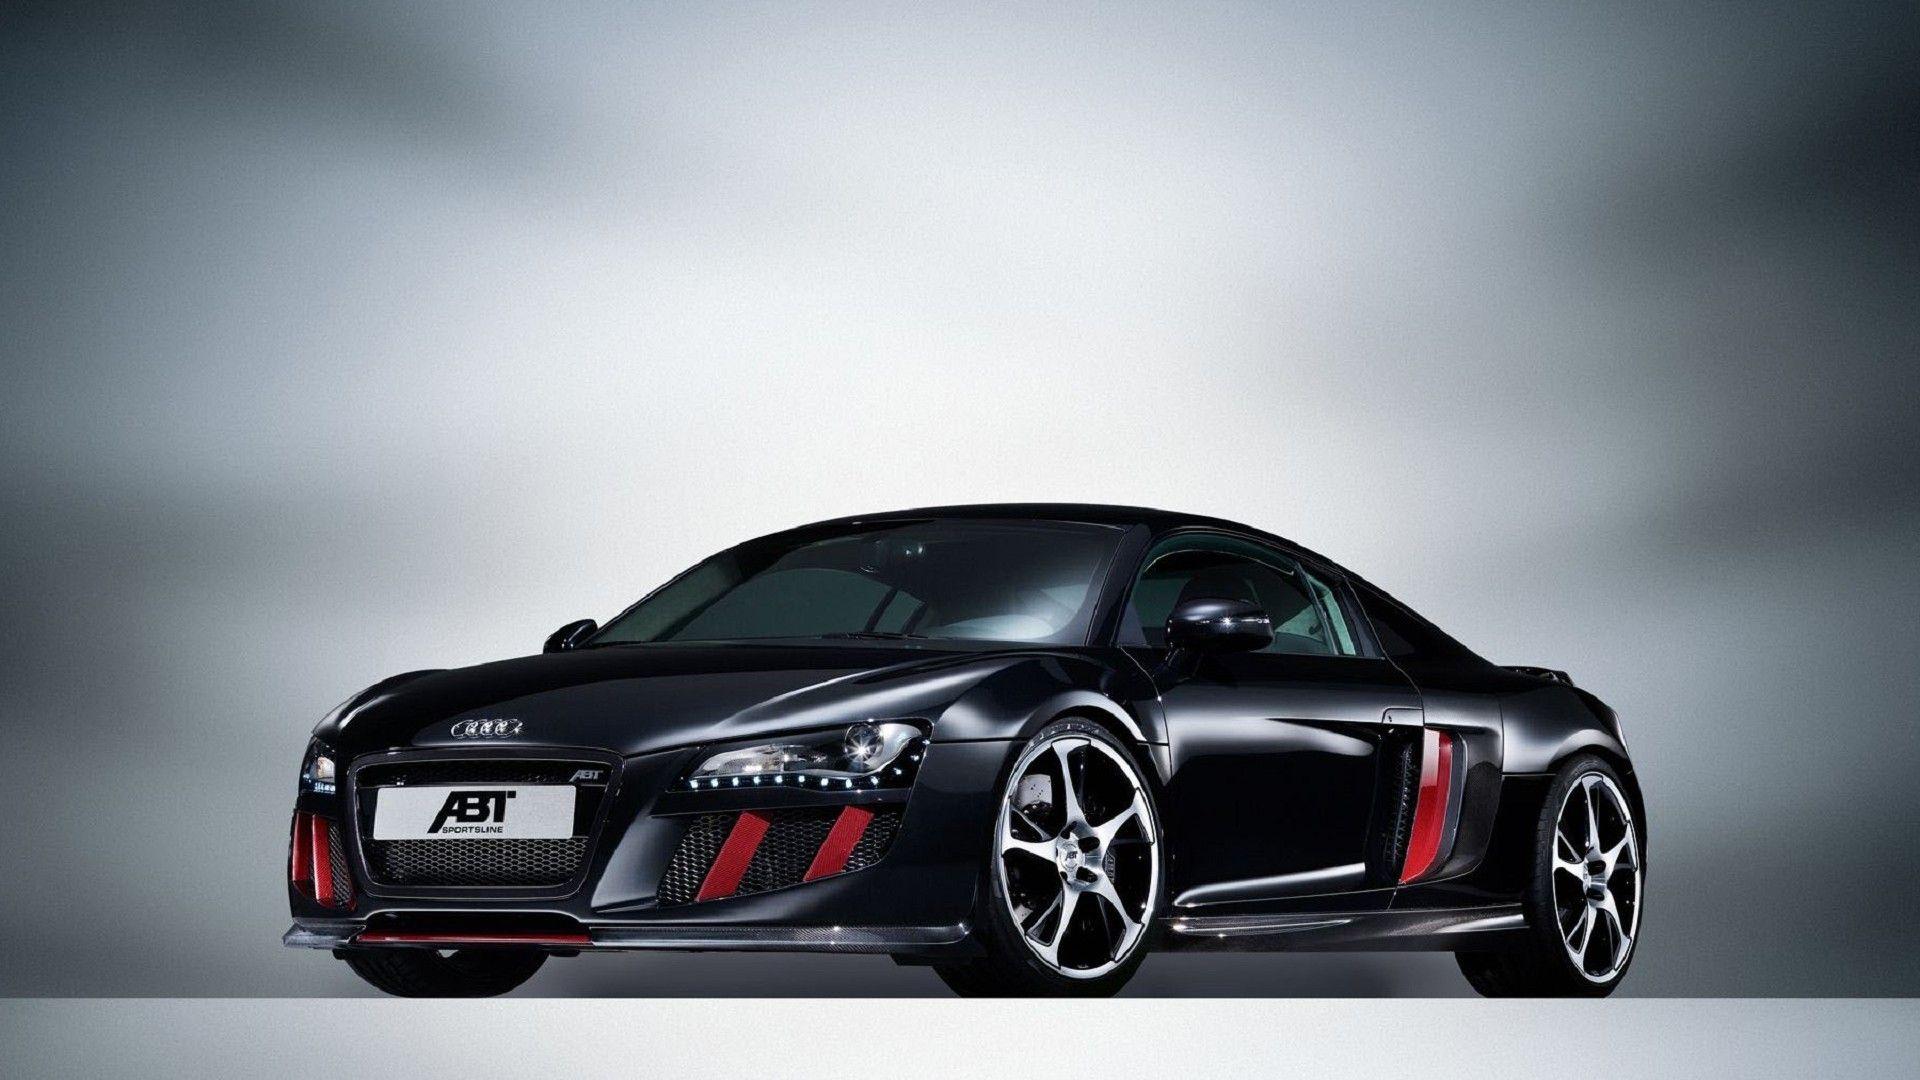 Black Audi R8 Logo - so badly want an Audi R8 if I can't get a Lotus Elise | Cars and ...